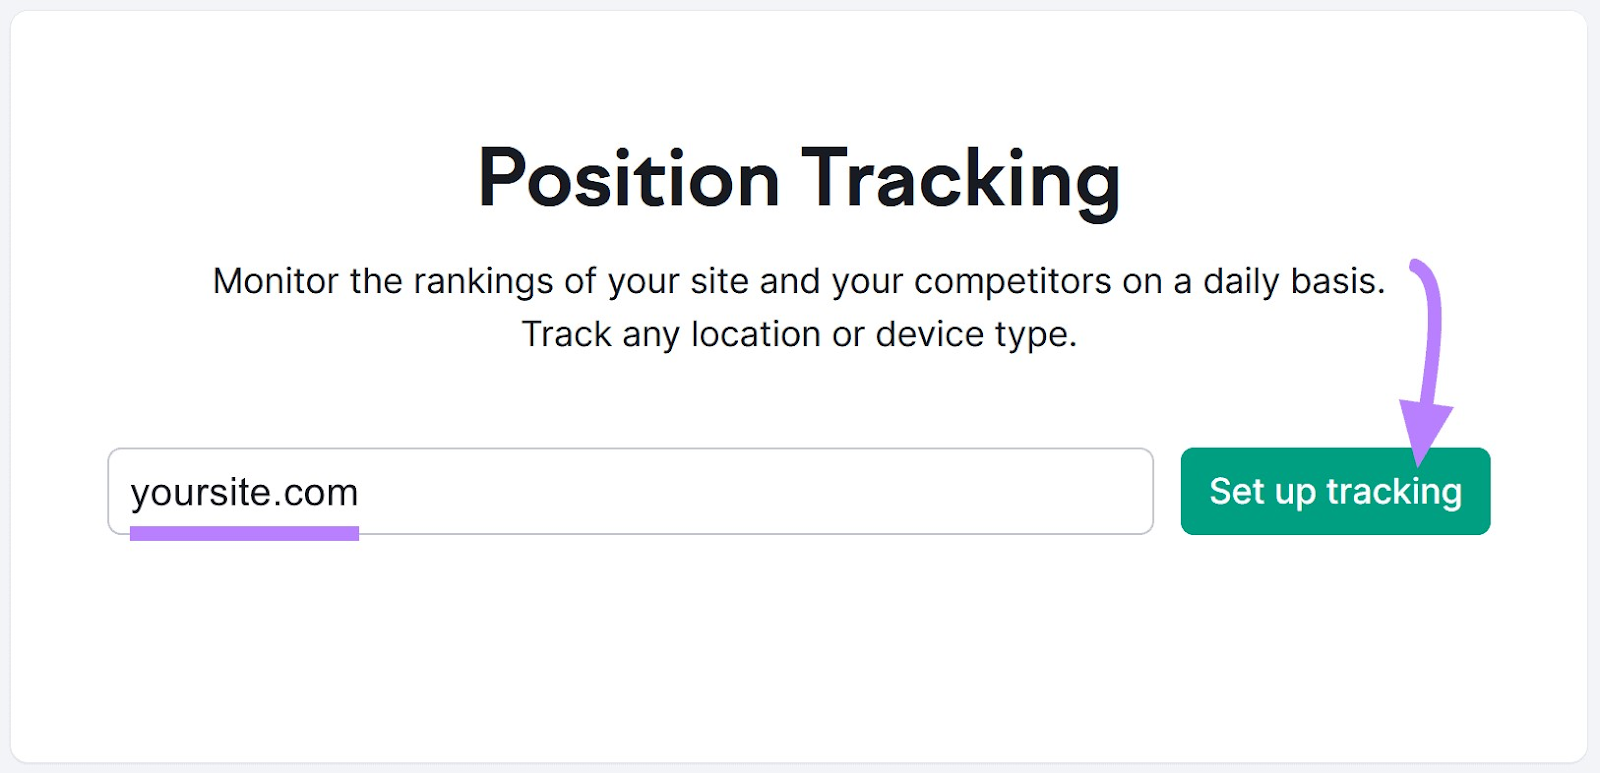 Position Tracking tool